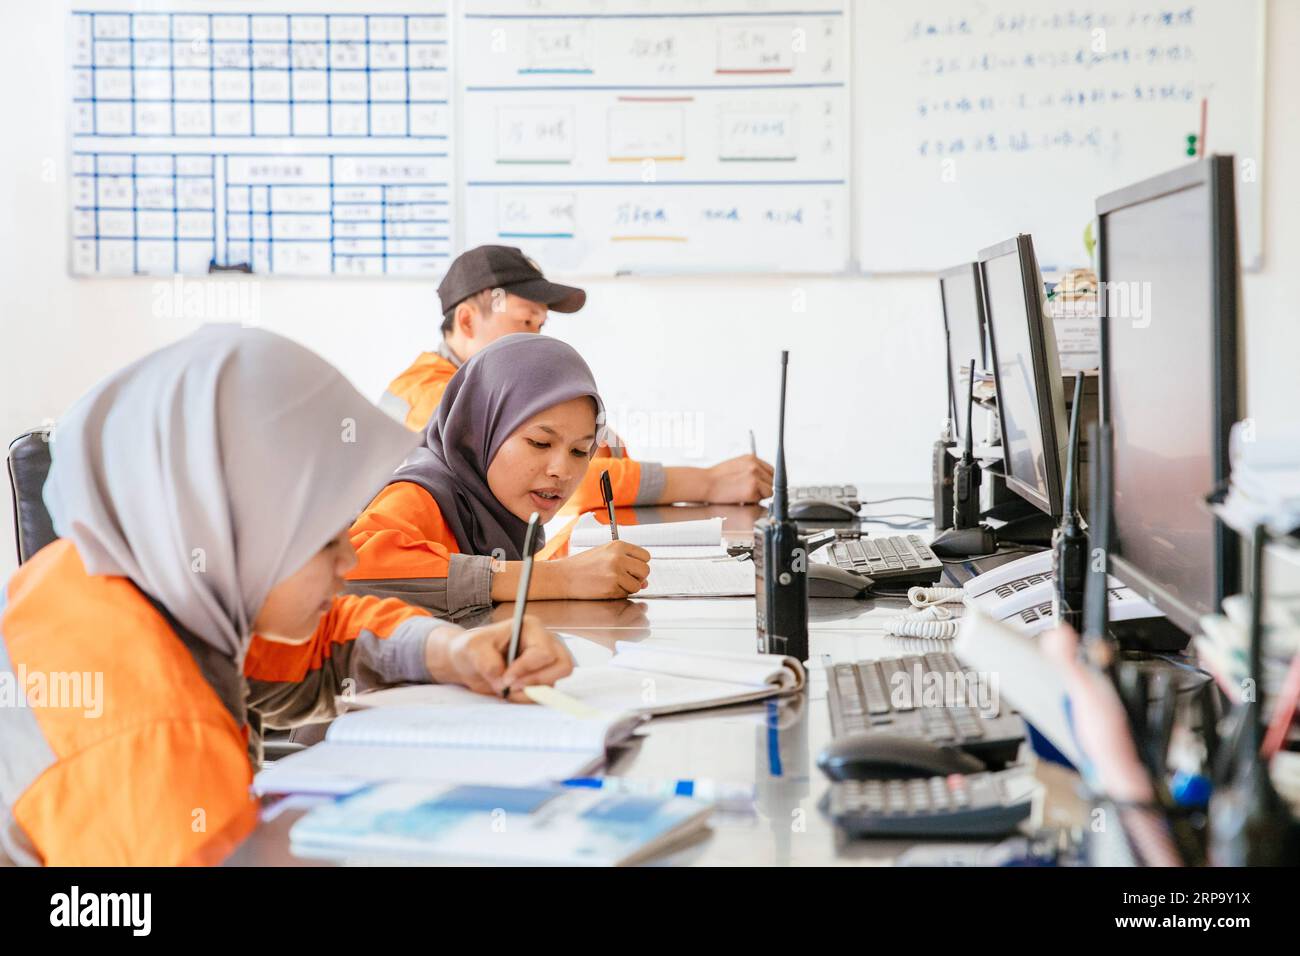 (190419) -- KUALA LUMPUR, April 19, 2019 (Xinhua) -- Nur Fatihah Binti Zakaria (2nd L) works at the coal preparation central control room at the Alliance Steel coking plant in Kuantan, Malaysia, April 15, 2019. At the beginning Malaysian college graduate Nur Fatihah Binti Zakaria had no idea about what steel production was all about, nor did she have any knowledge about speaking Chinese. But after almost two years working at the Alliance Steel at the Malaysia, China Kuantan Industrial Park, she now can perform her job skillfully, even making fun of her colleagues from China that not all of the Stock Photo